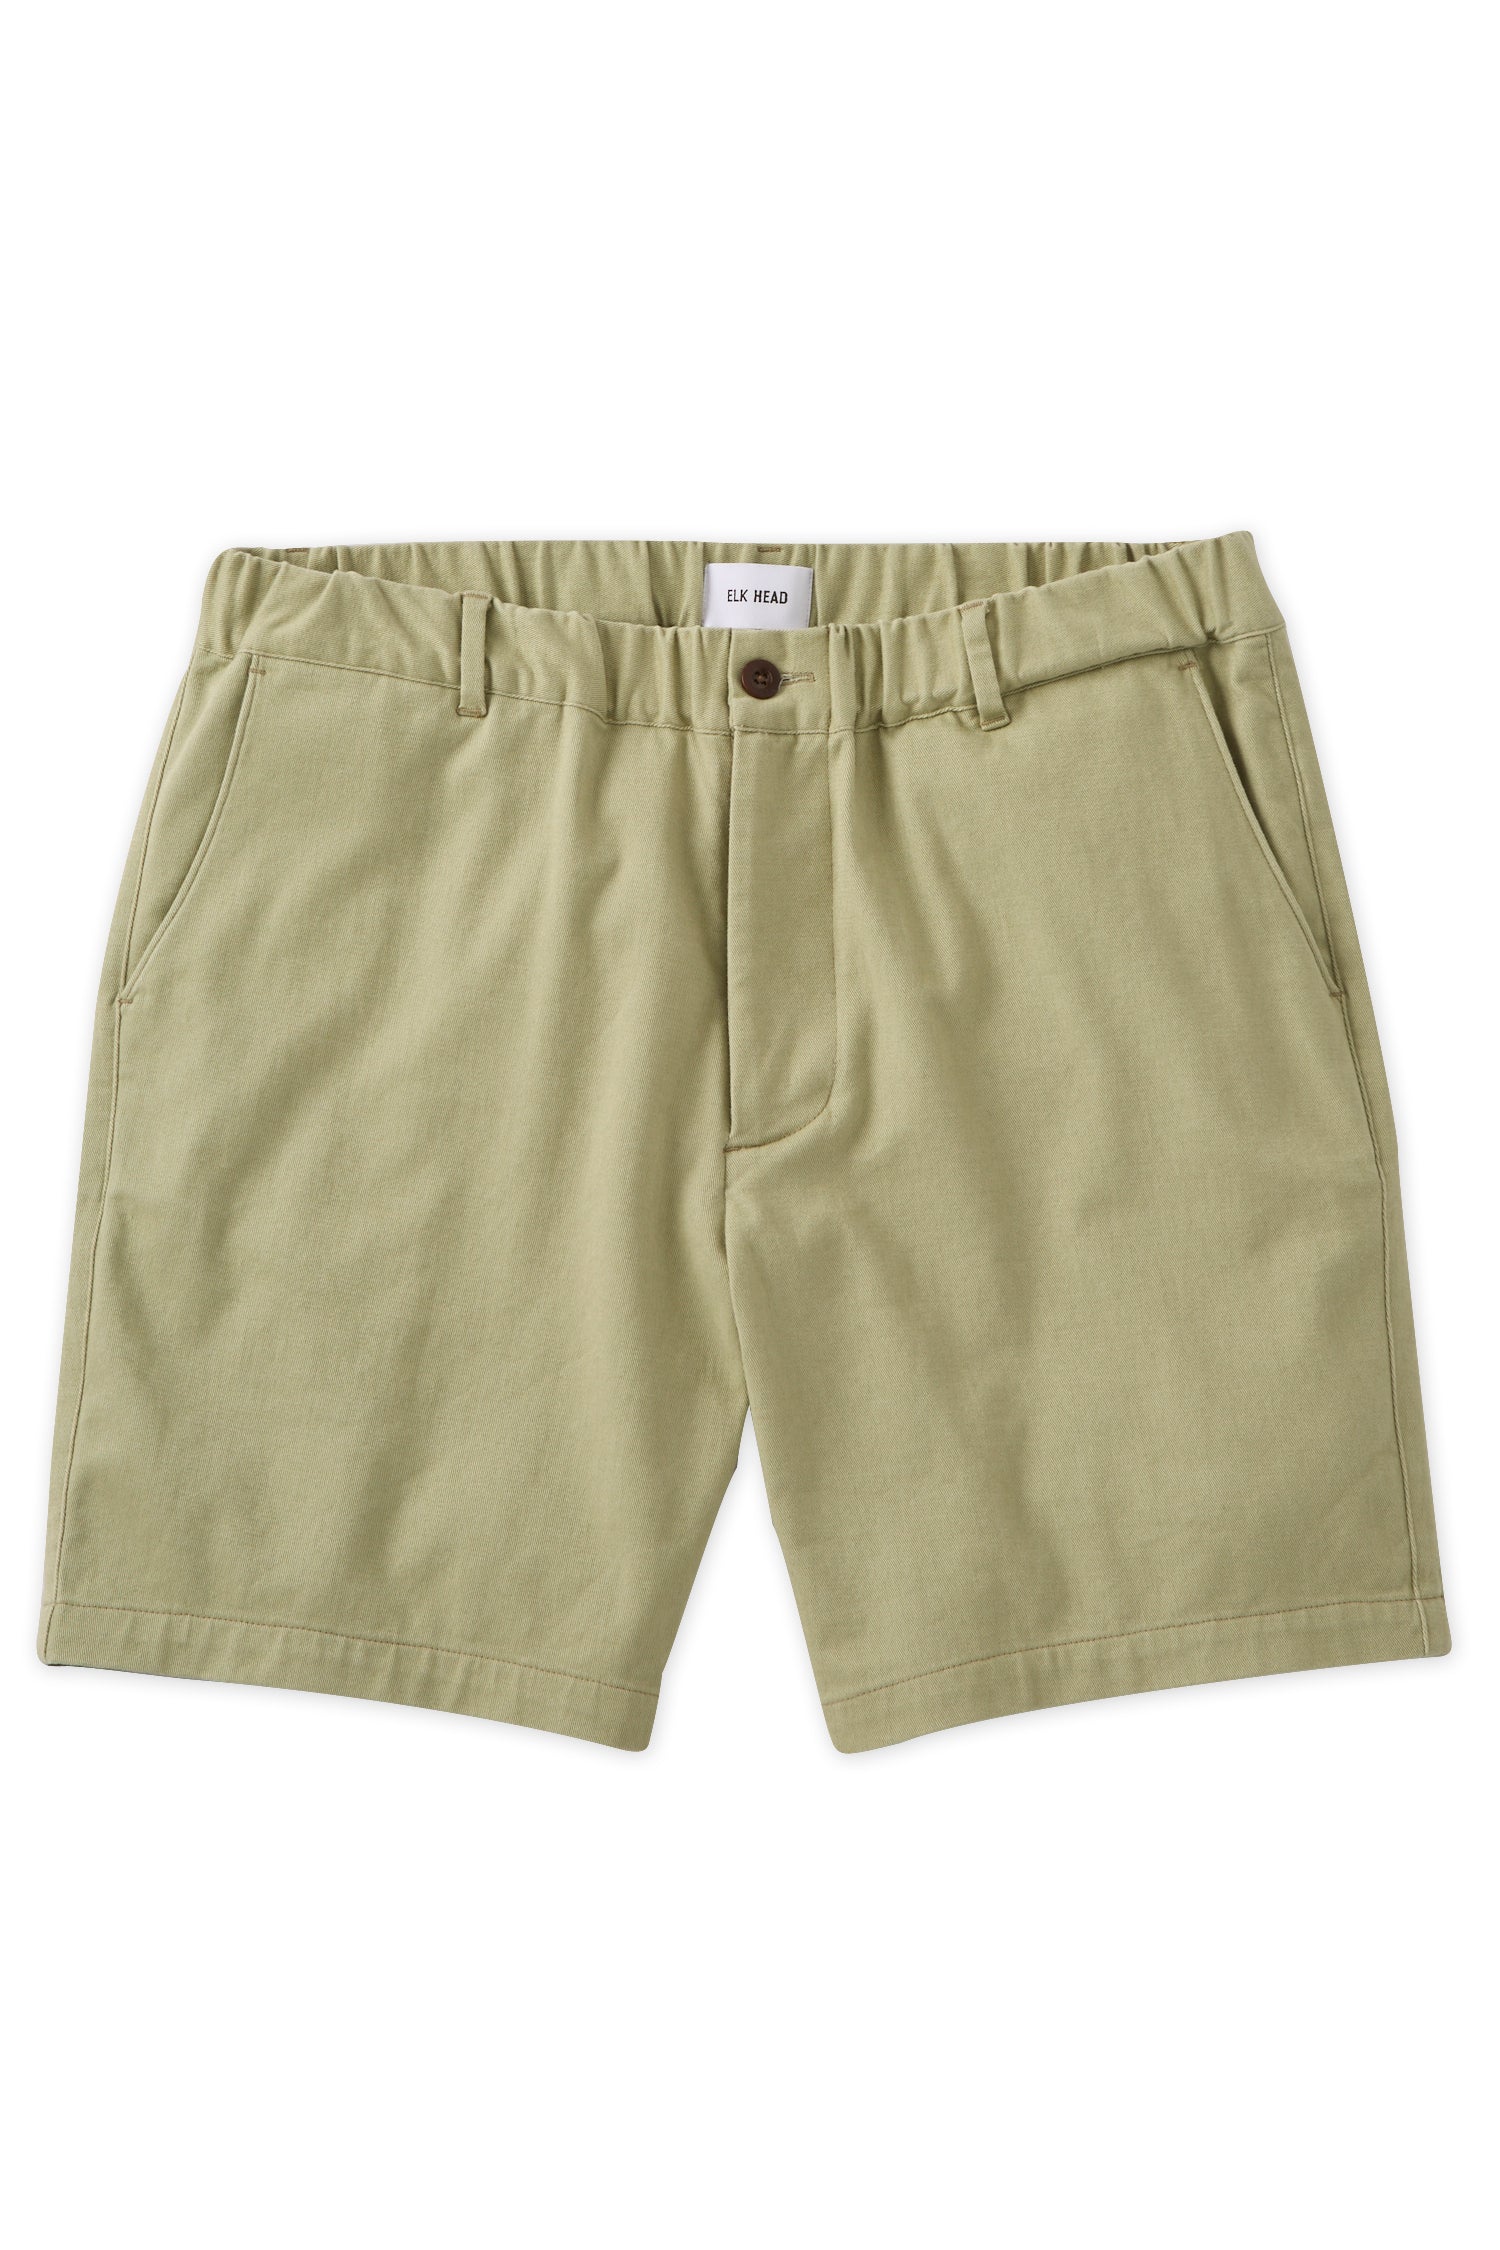 Brushed Cotton Stretch Shorts- Light Green (6.75 Inseam )